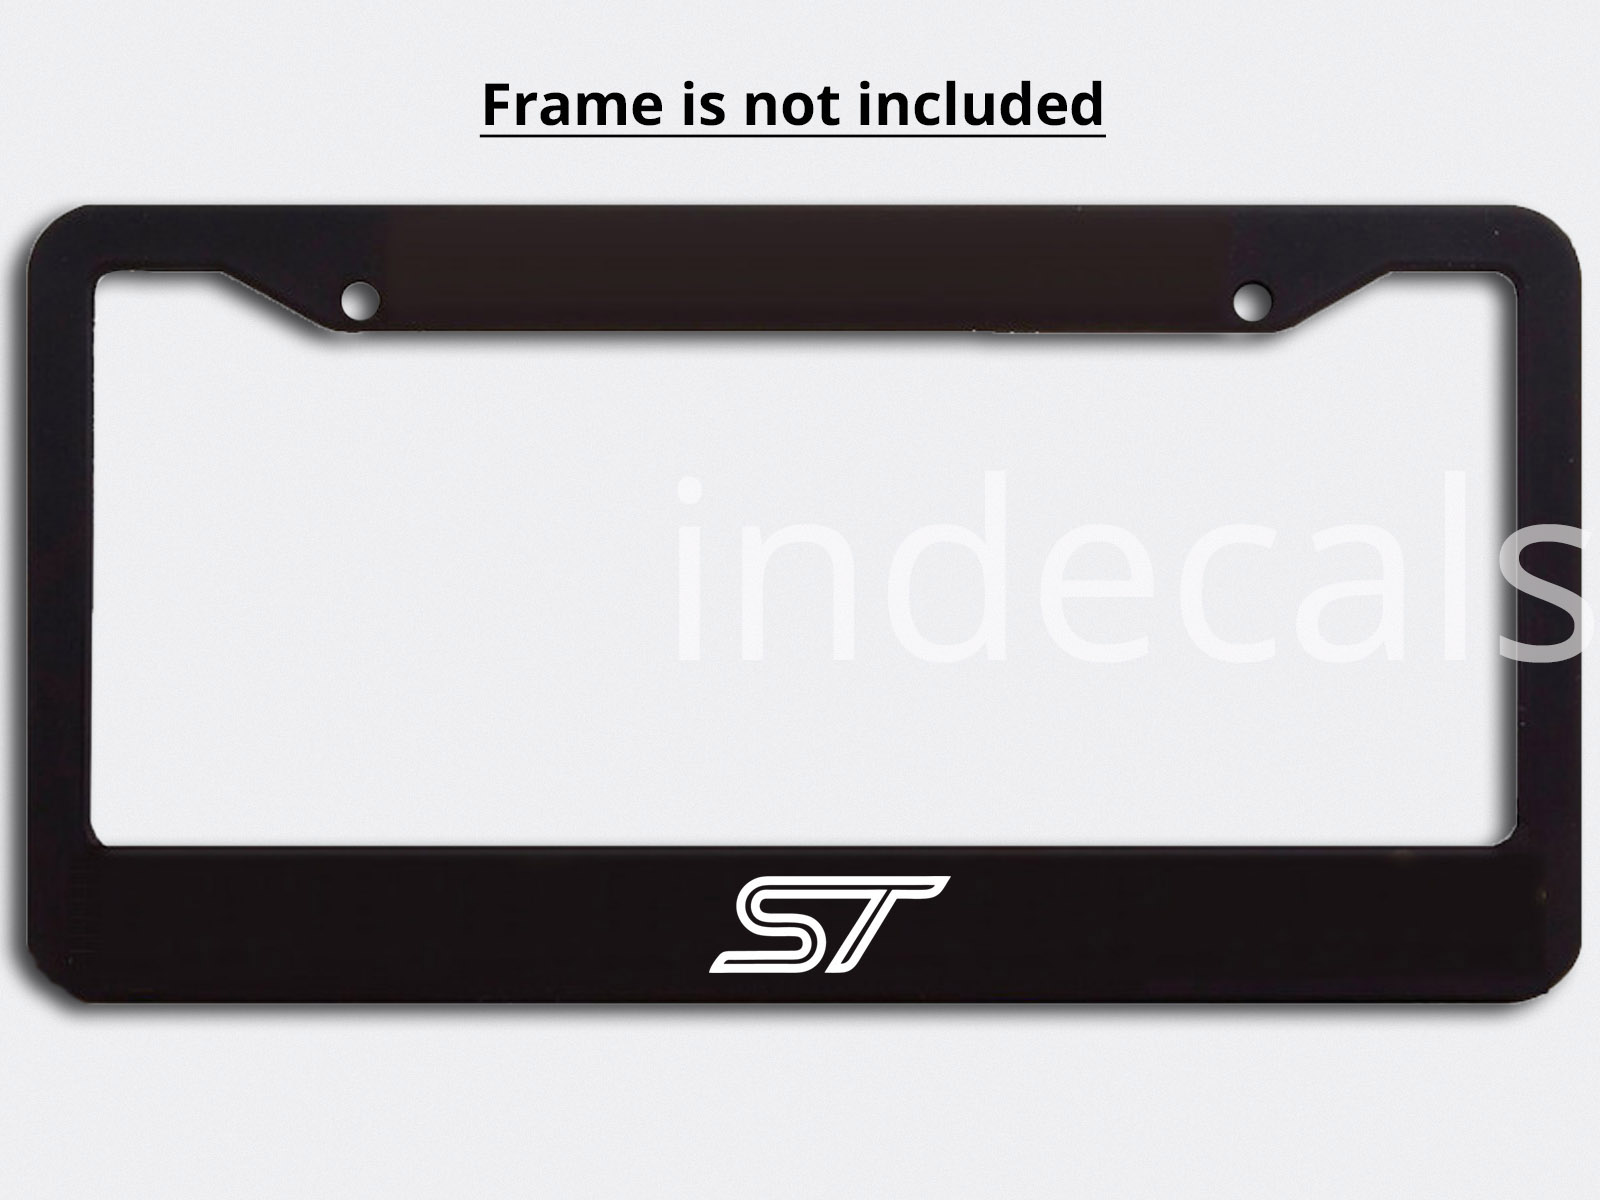 3 x Ford ST Stickers for License Plate Frame - White